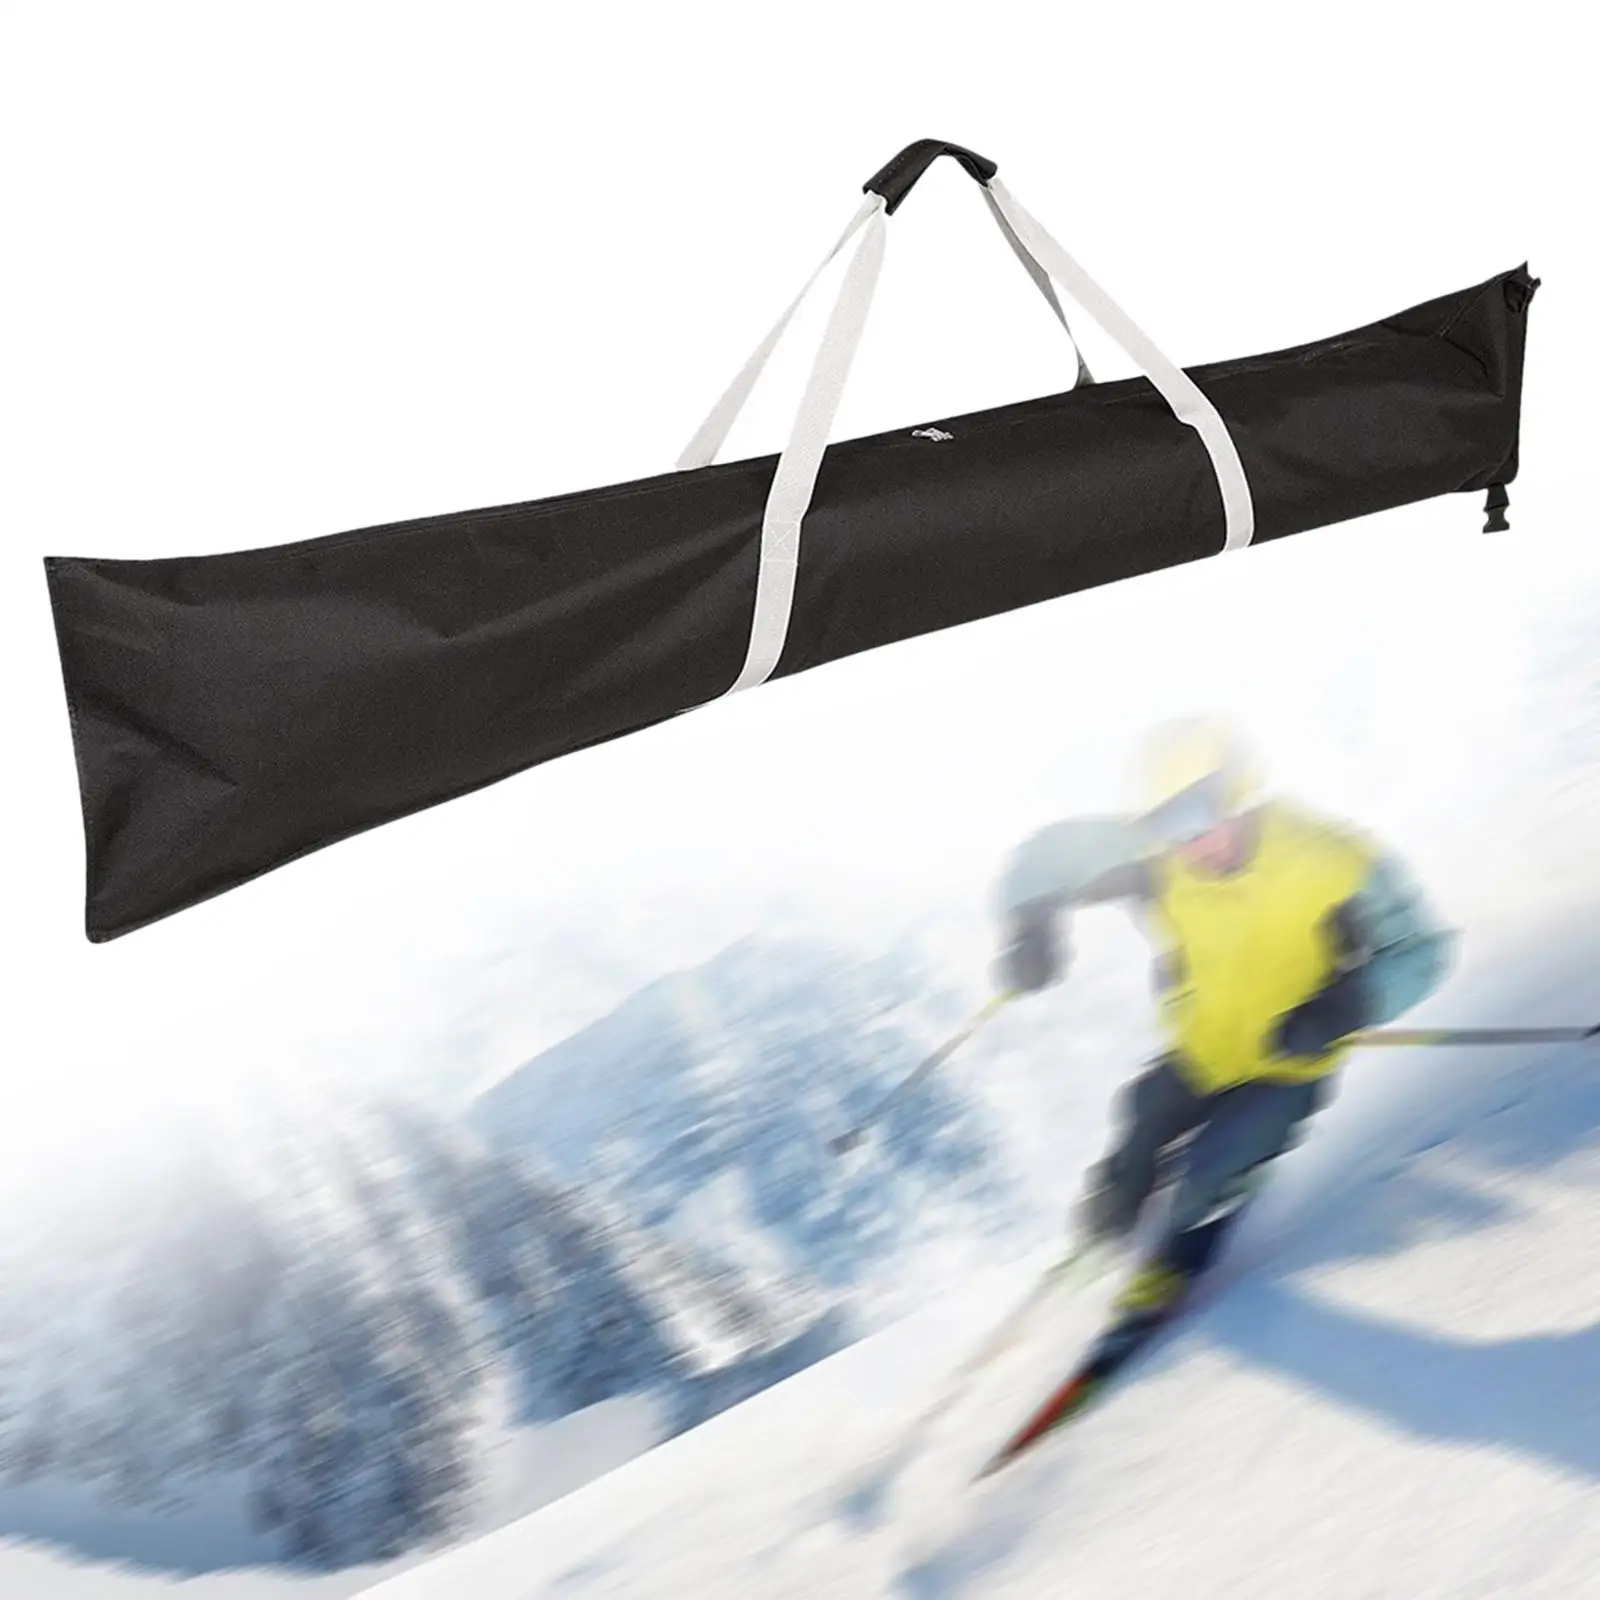 Ski Bag Snow Travel Transport with Handle Snowboard Equipment Protective Snowboards Poles Bag for Skiing Winter Sports Outdoor